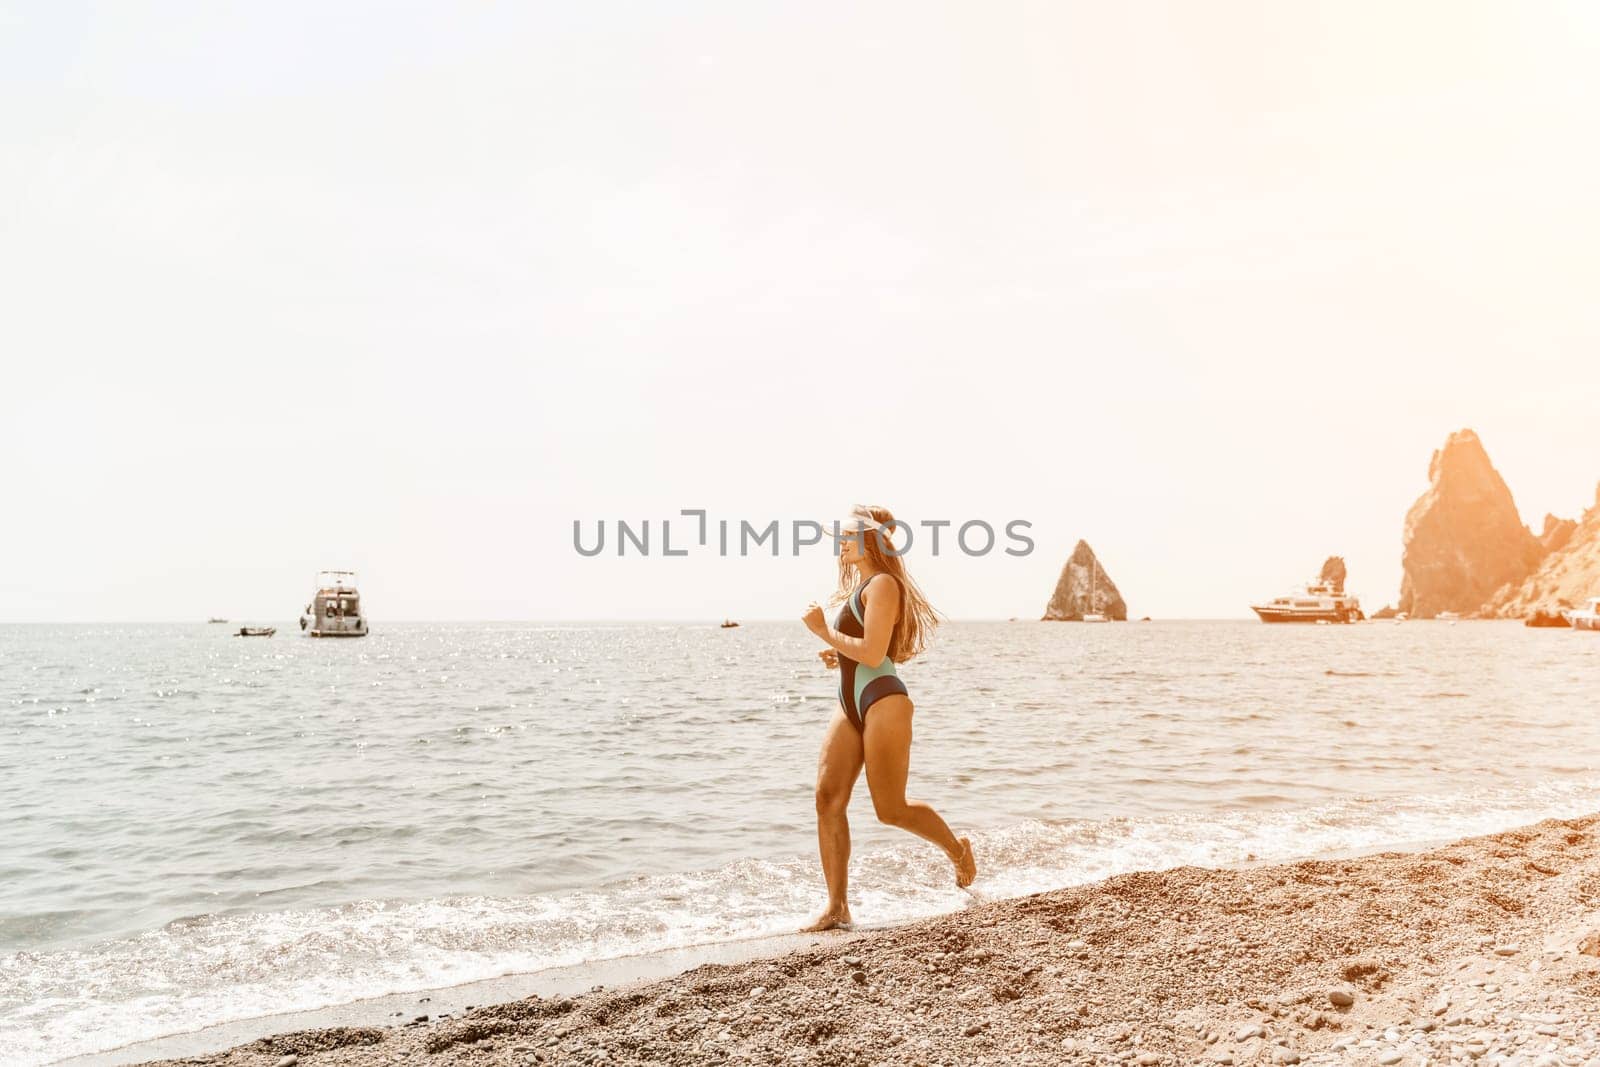 Woman travel summer sea. A happy tourist in a blue bikini enjoying the scenic view of the sea and volcanic mountains while taking pictures to capture the memories of her travel adventure